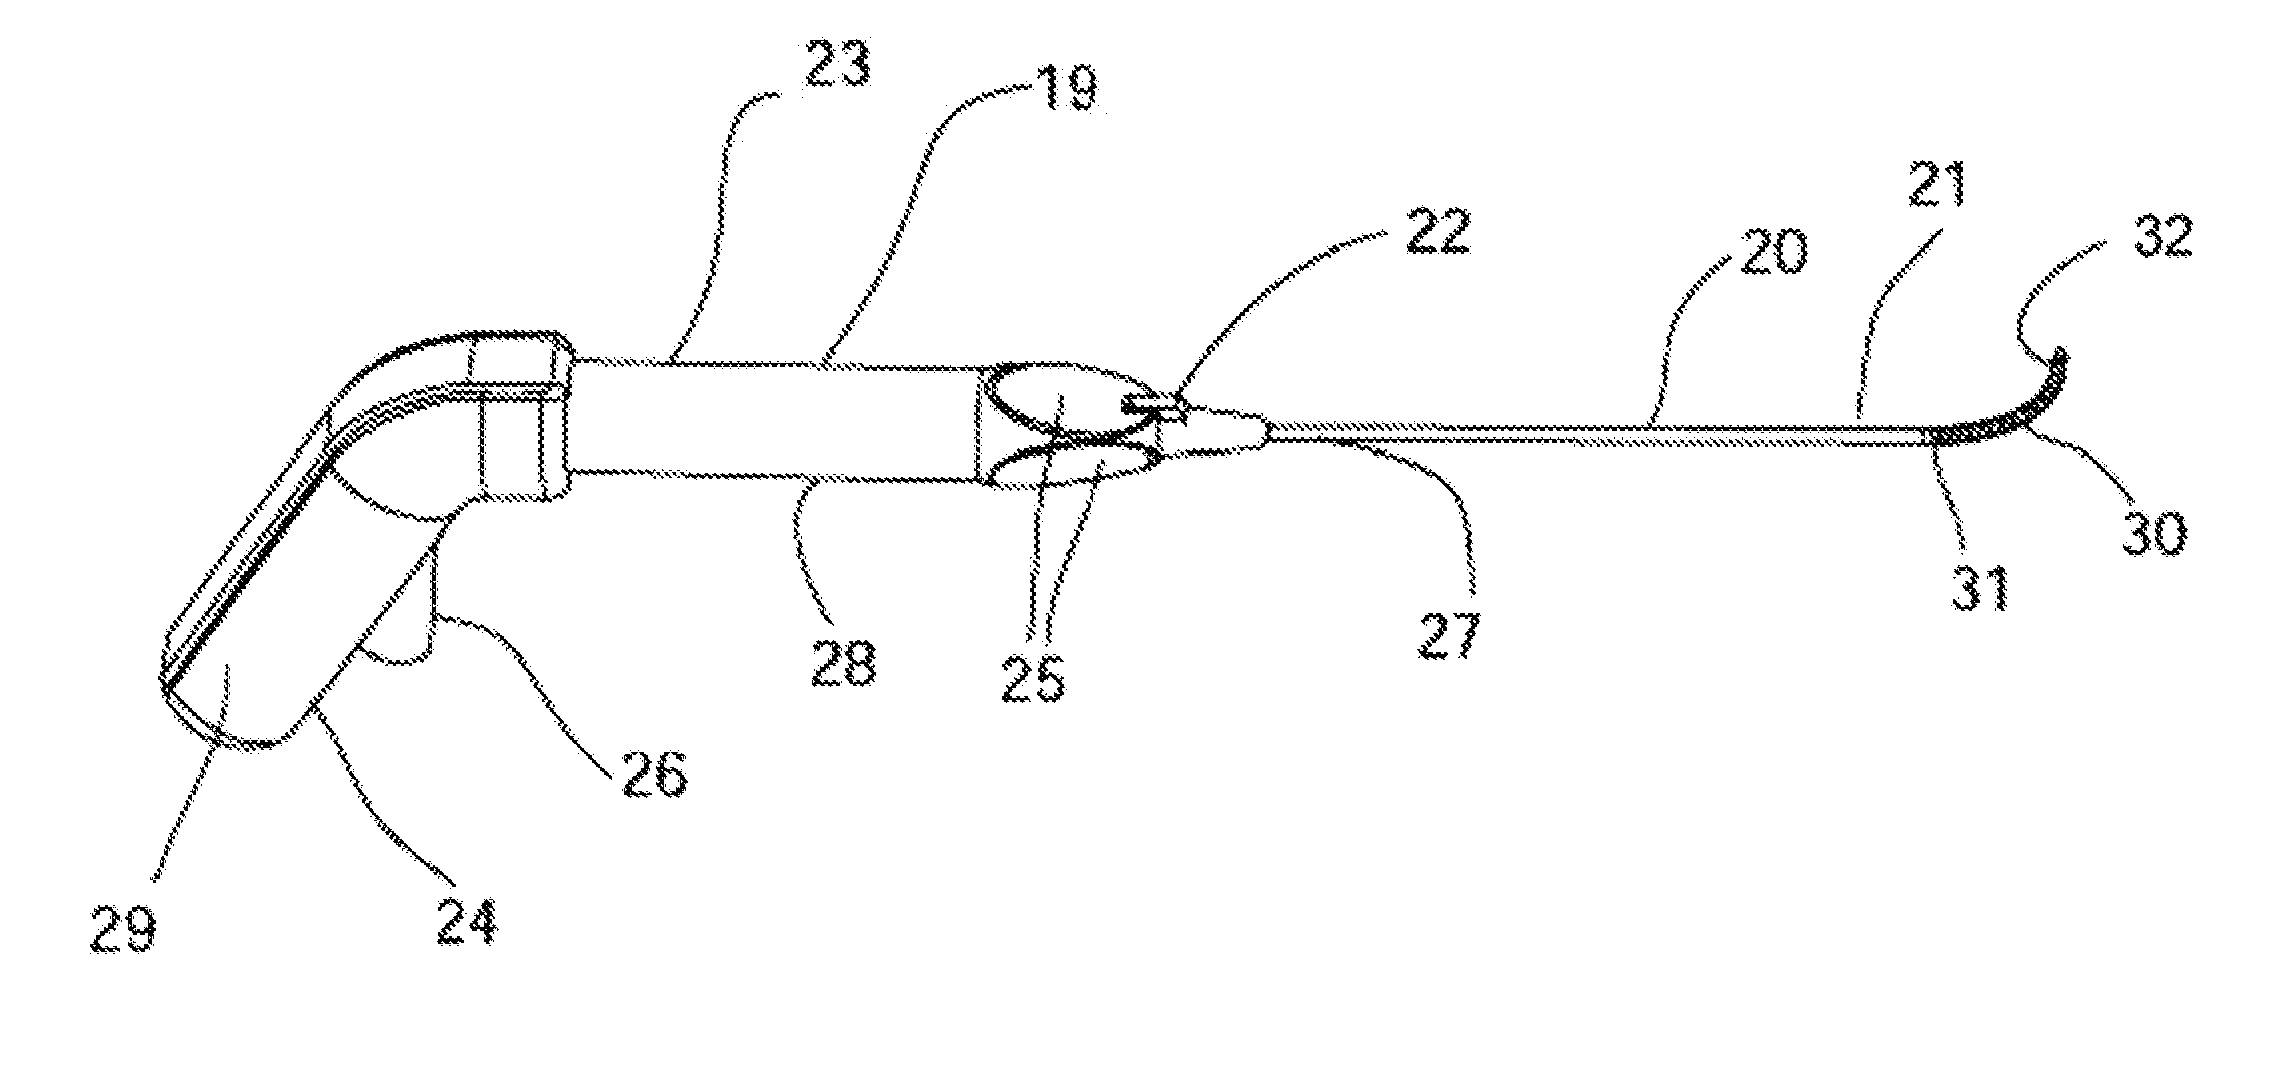 Apparatus and Methods for Treating Rhinitis